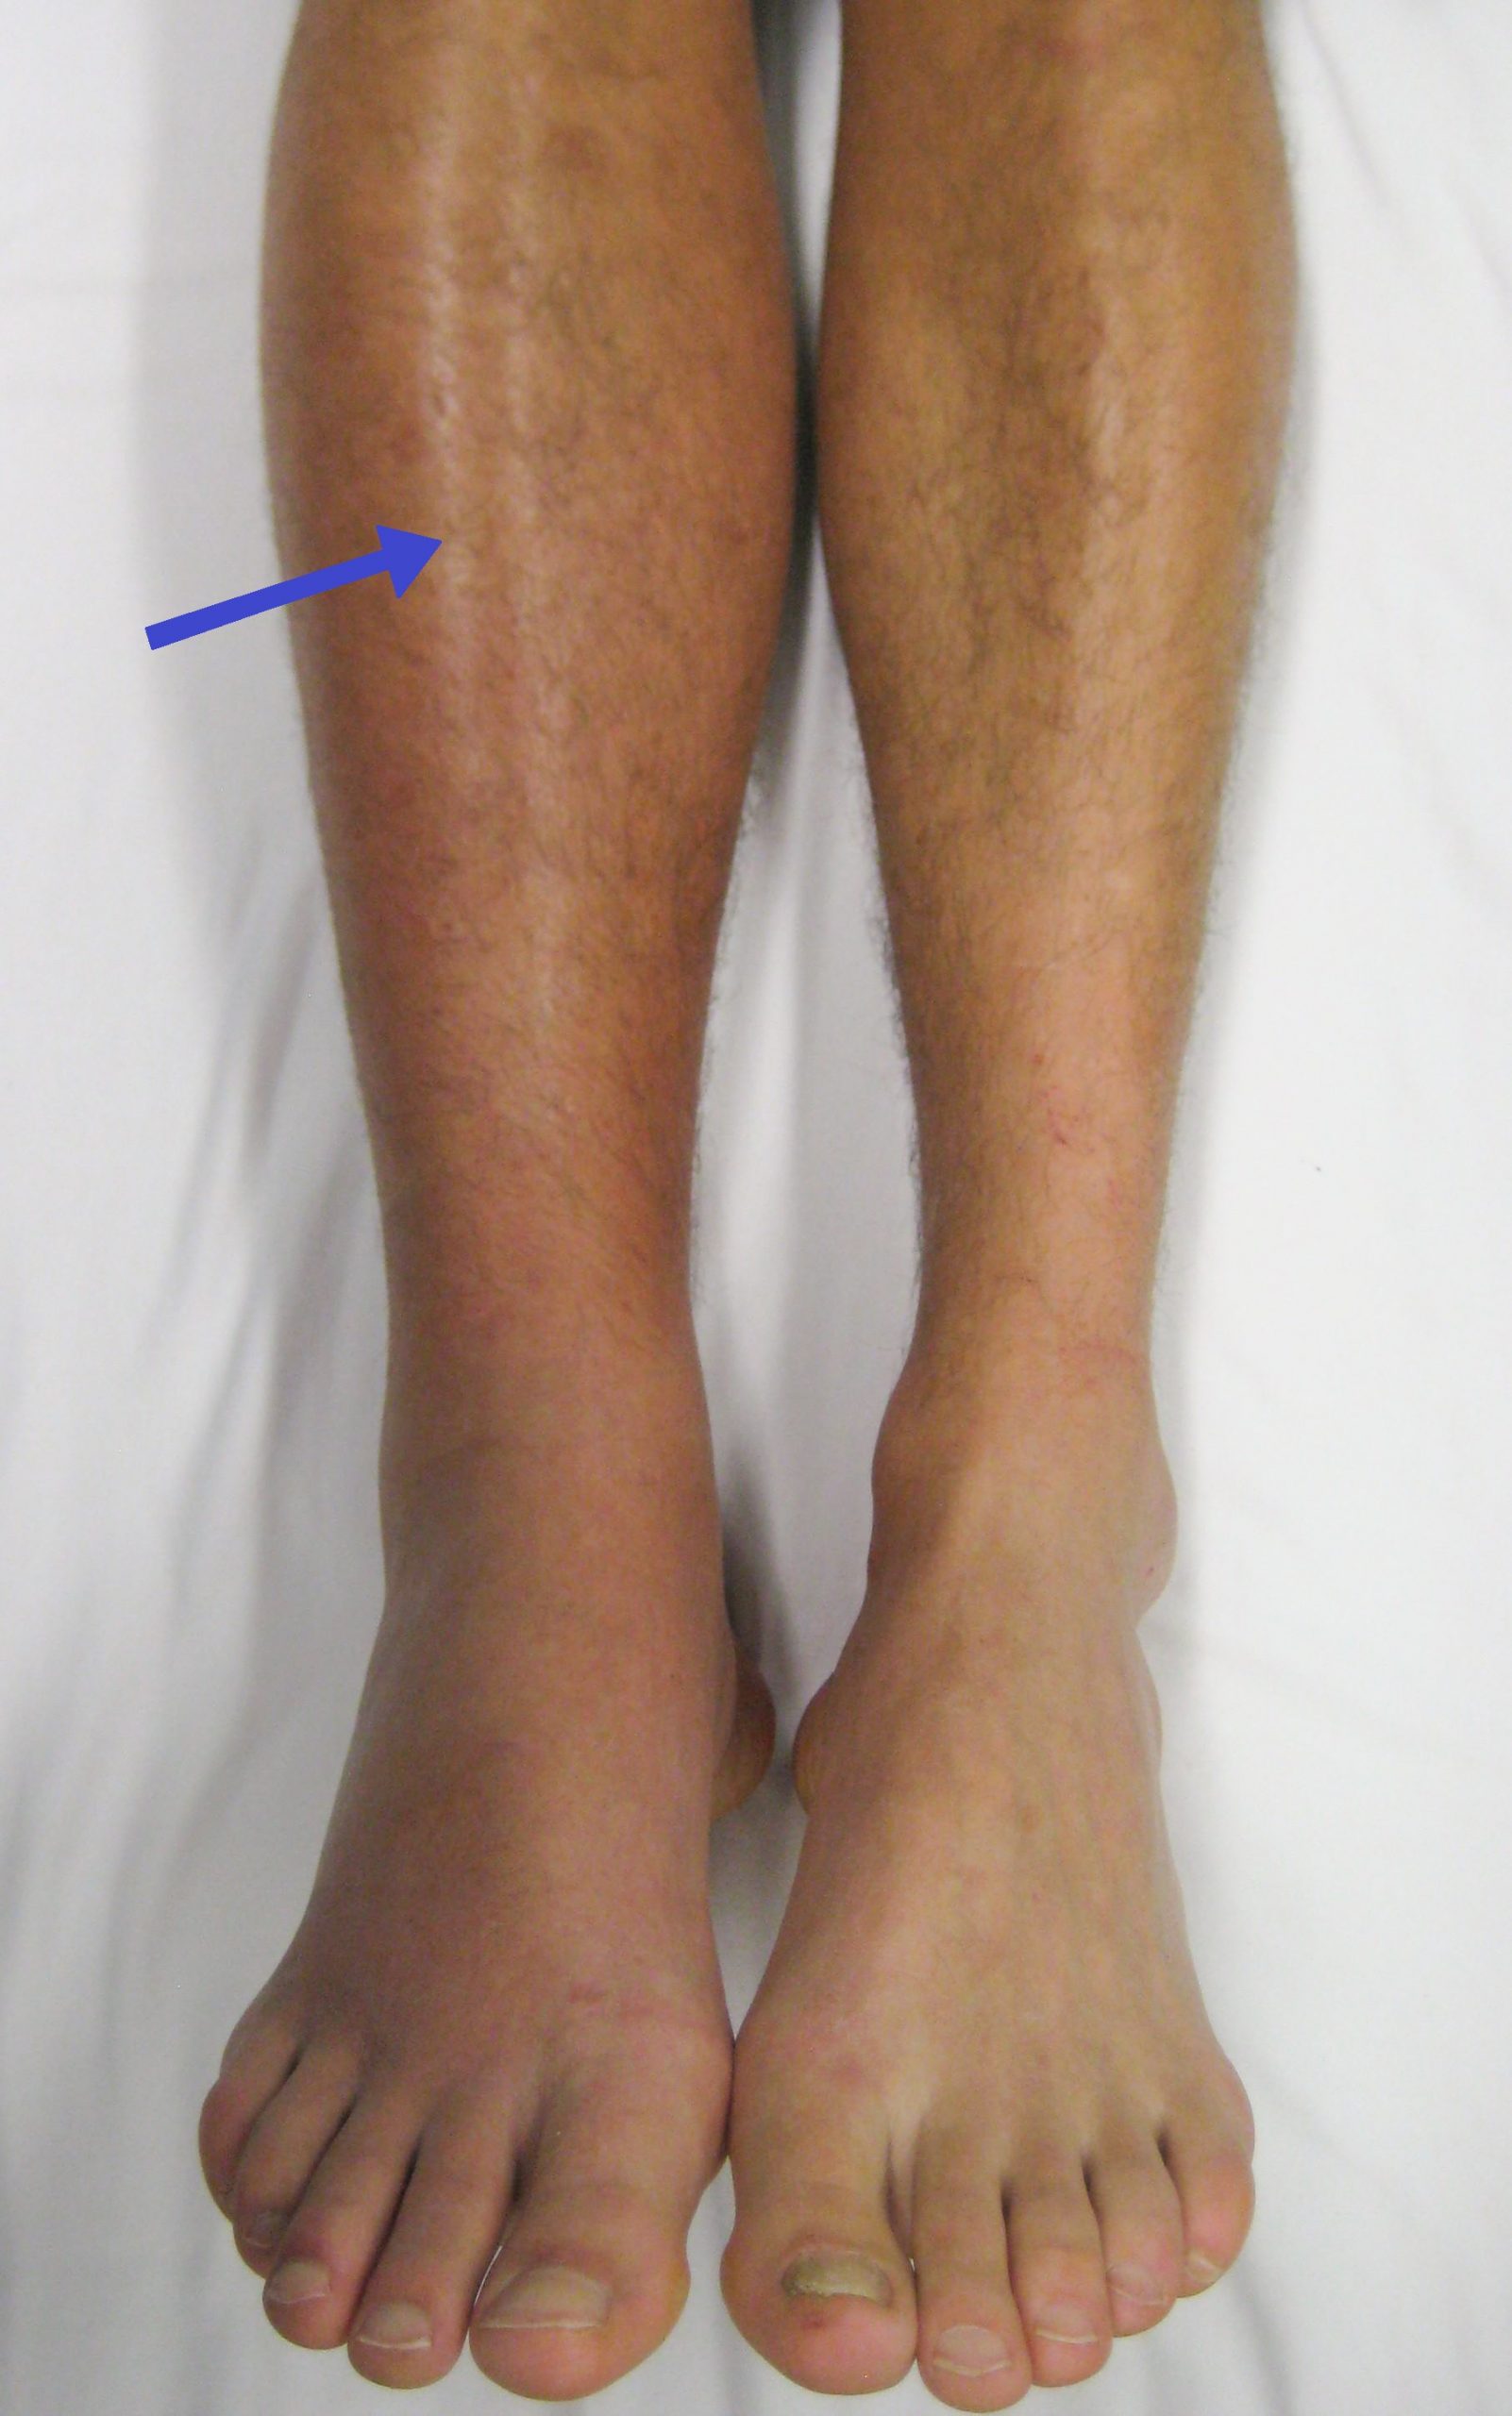 Image showing Deep Vein Thrombosis (DVT) with an arrow pointing to leg affected